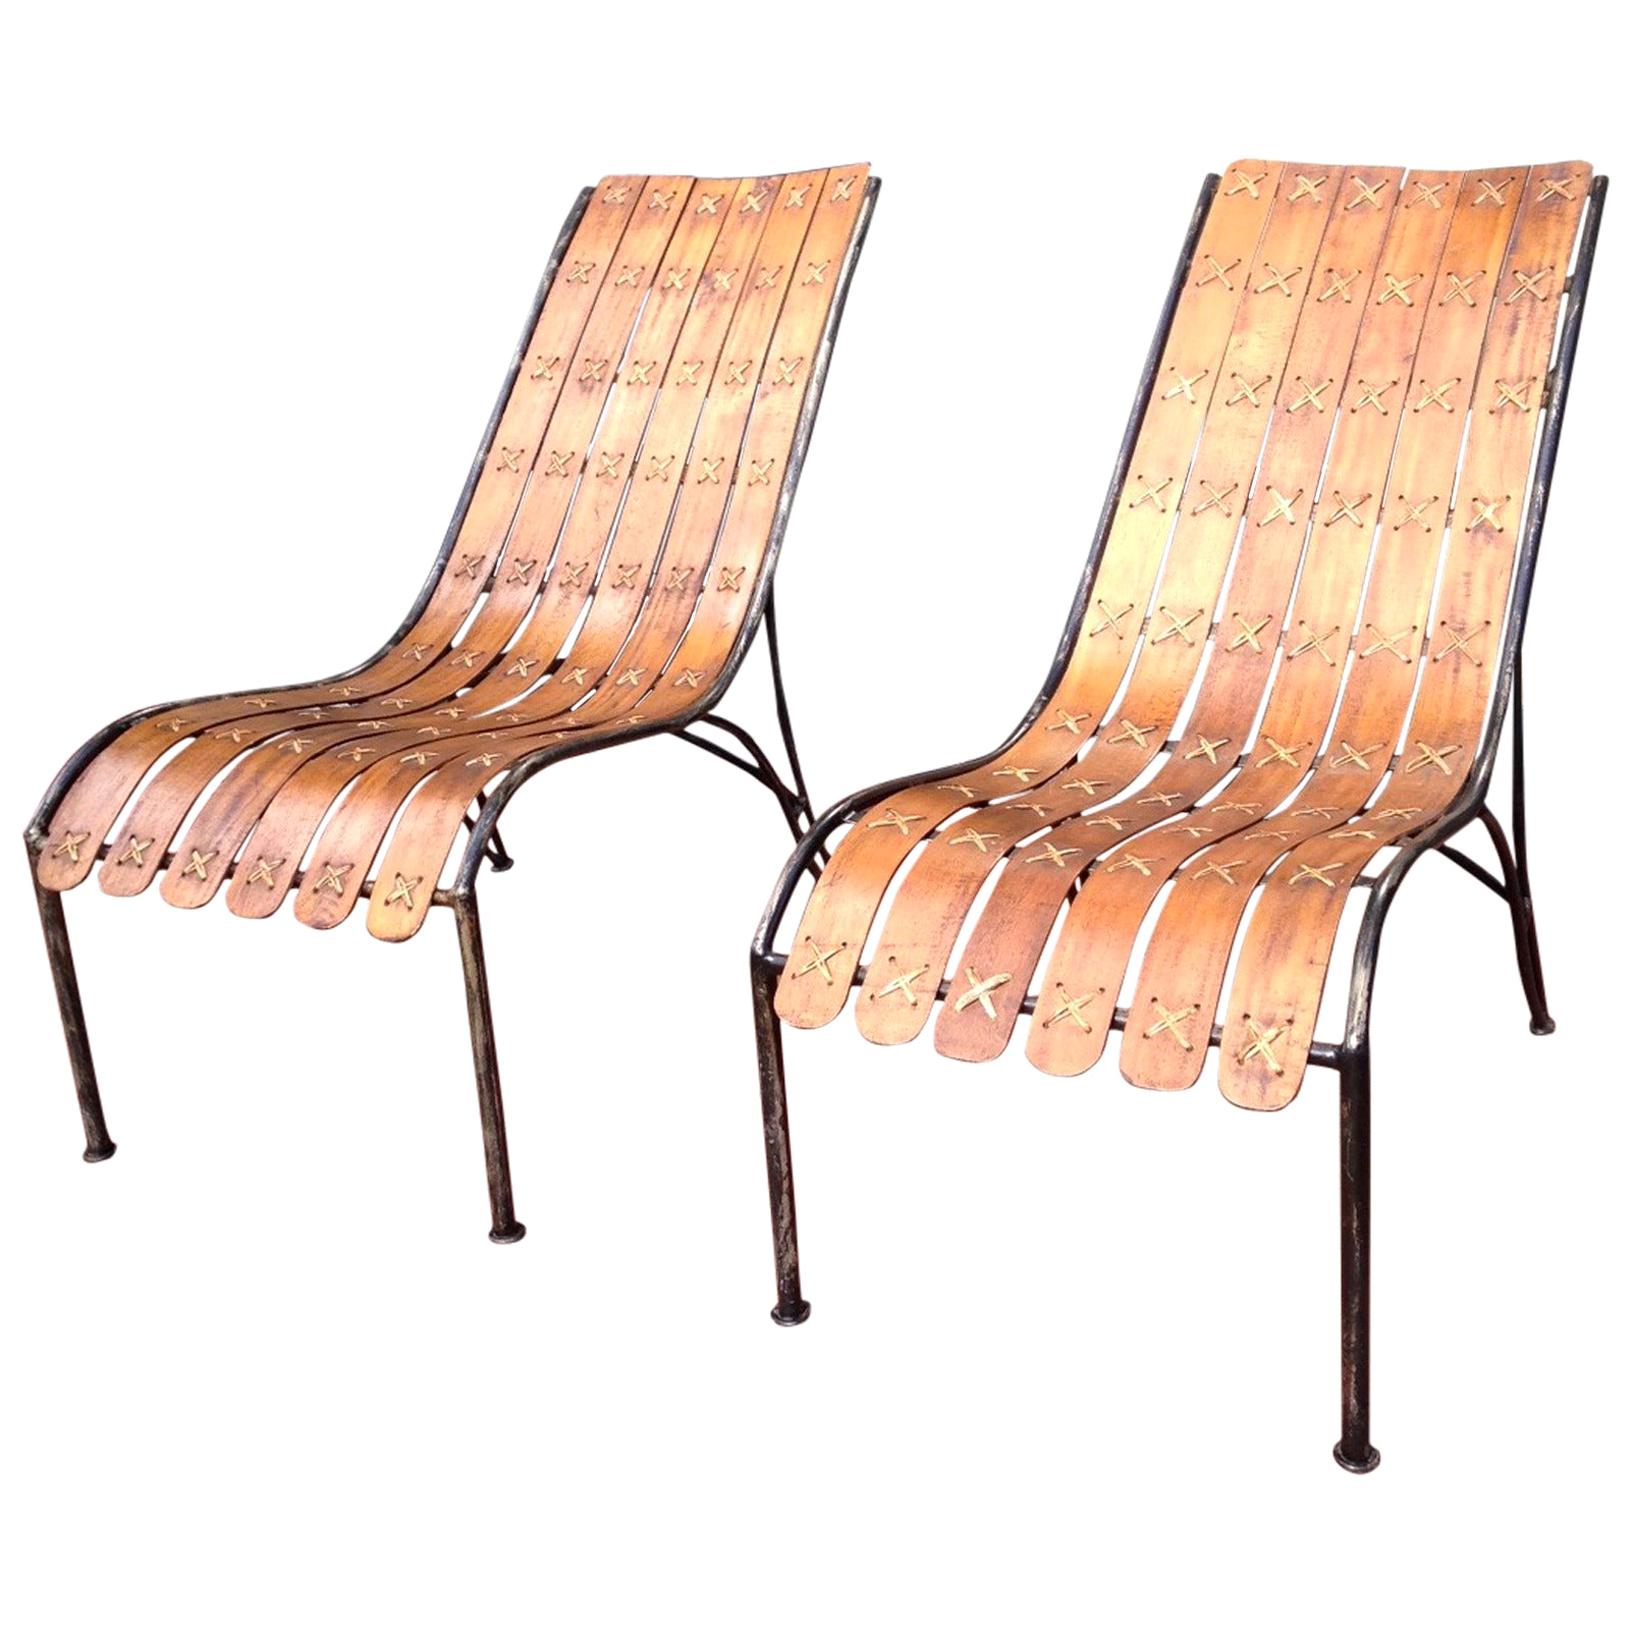 Style of Hans Brattrud Lounge Chairs